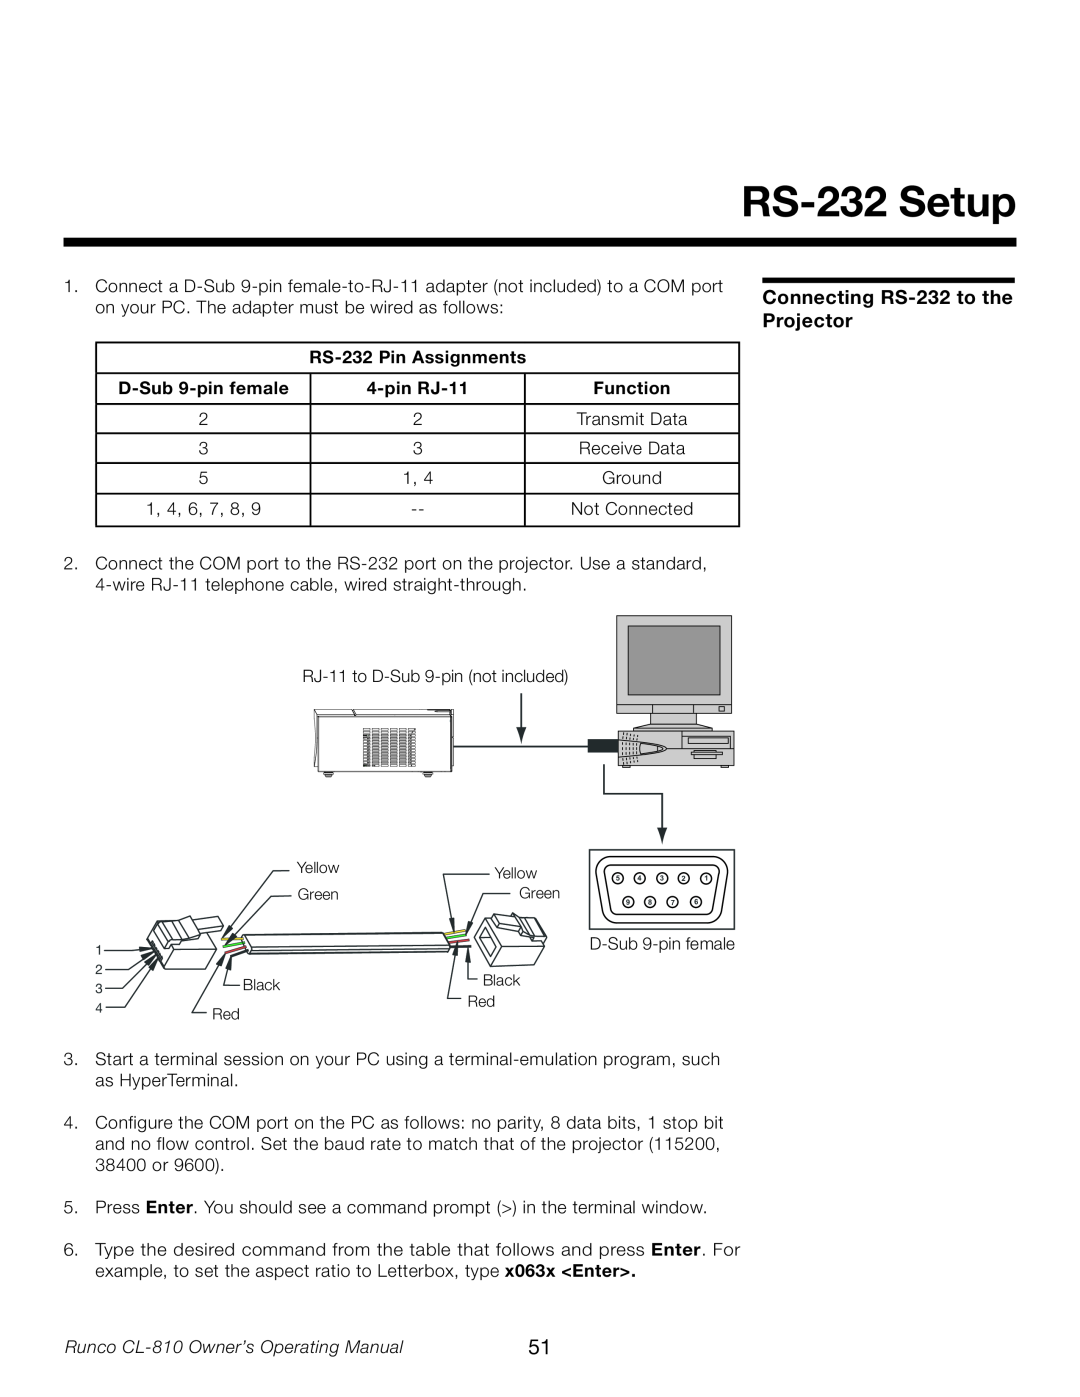 Runco CL-810 manual RS-232 Setup, Connecting RS-232 to the Projector, RS-232 Pin Assignments, D-Sub 9-pin female, pin RJ-11 